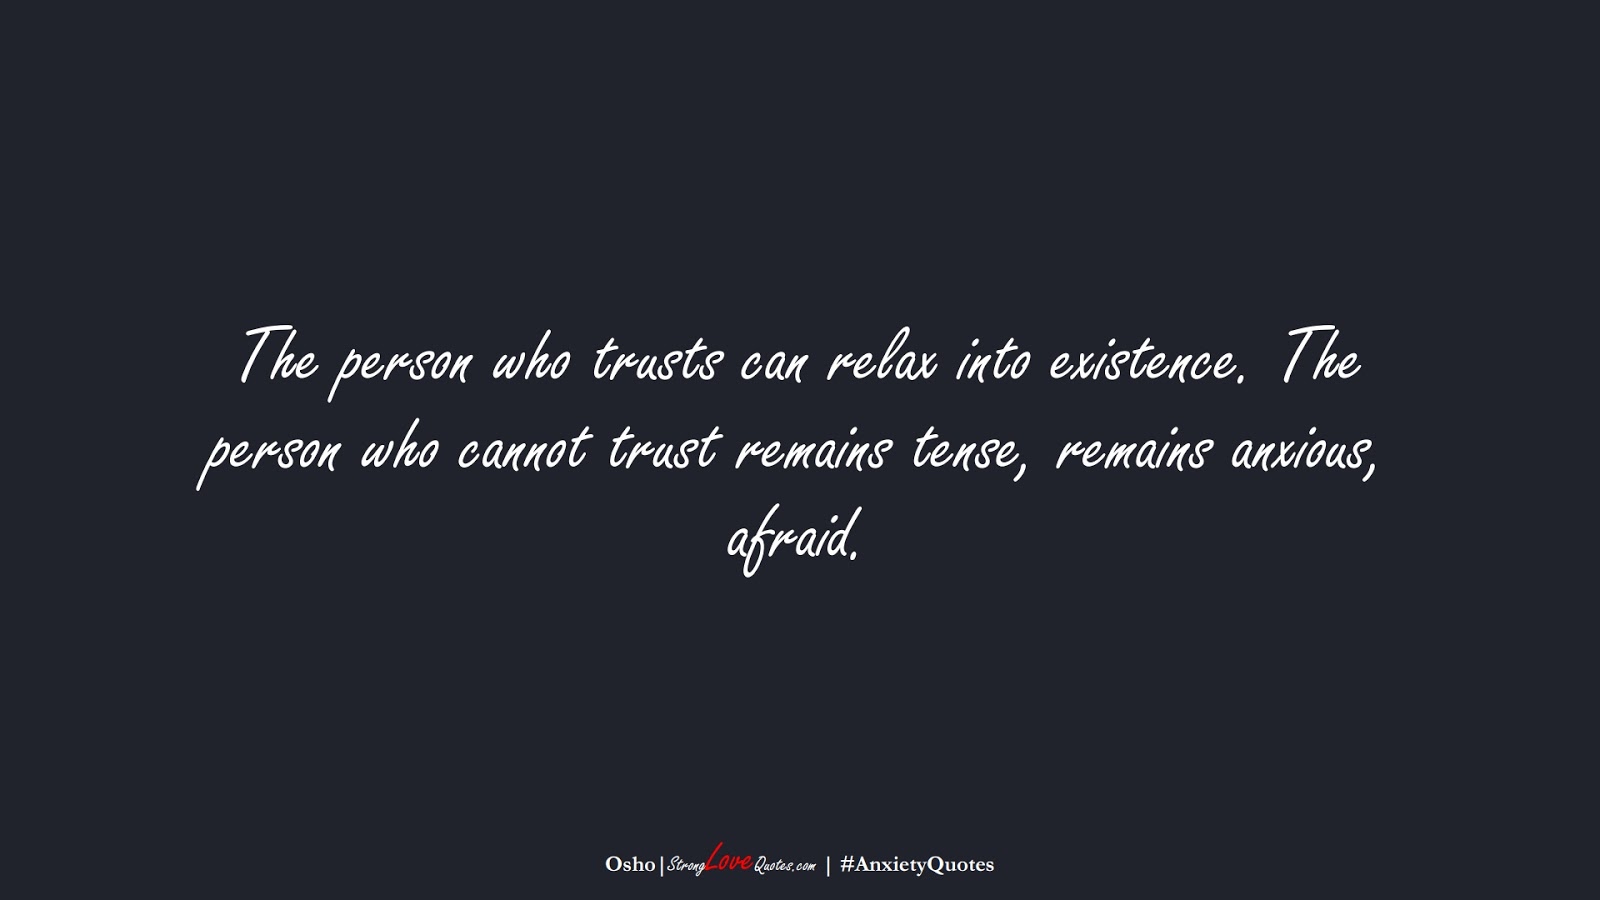 The person who trusts can relax into existence. The person who cannot trust remains tense, remains anxious, afraid. (Osho);  #AnxietyQuotes